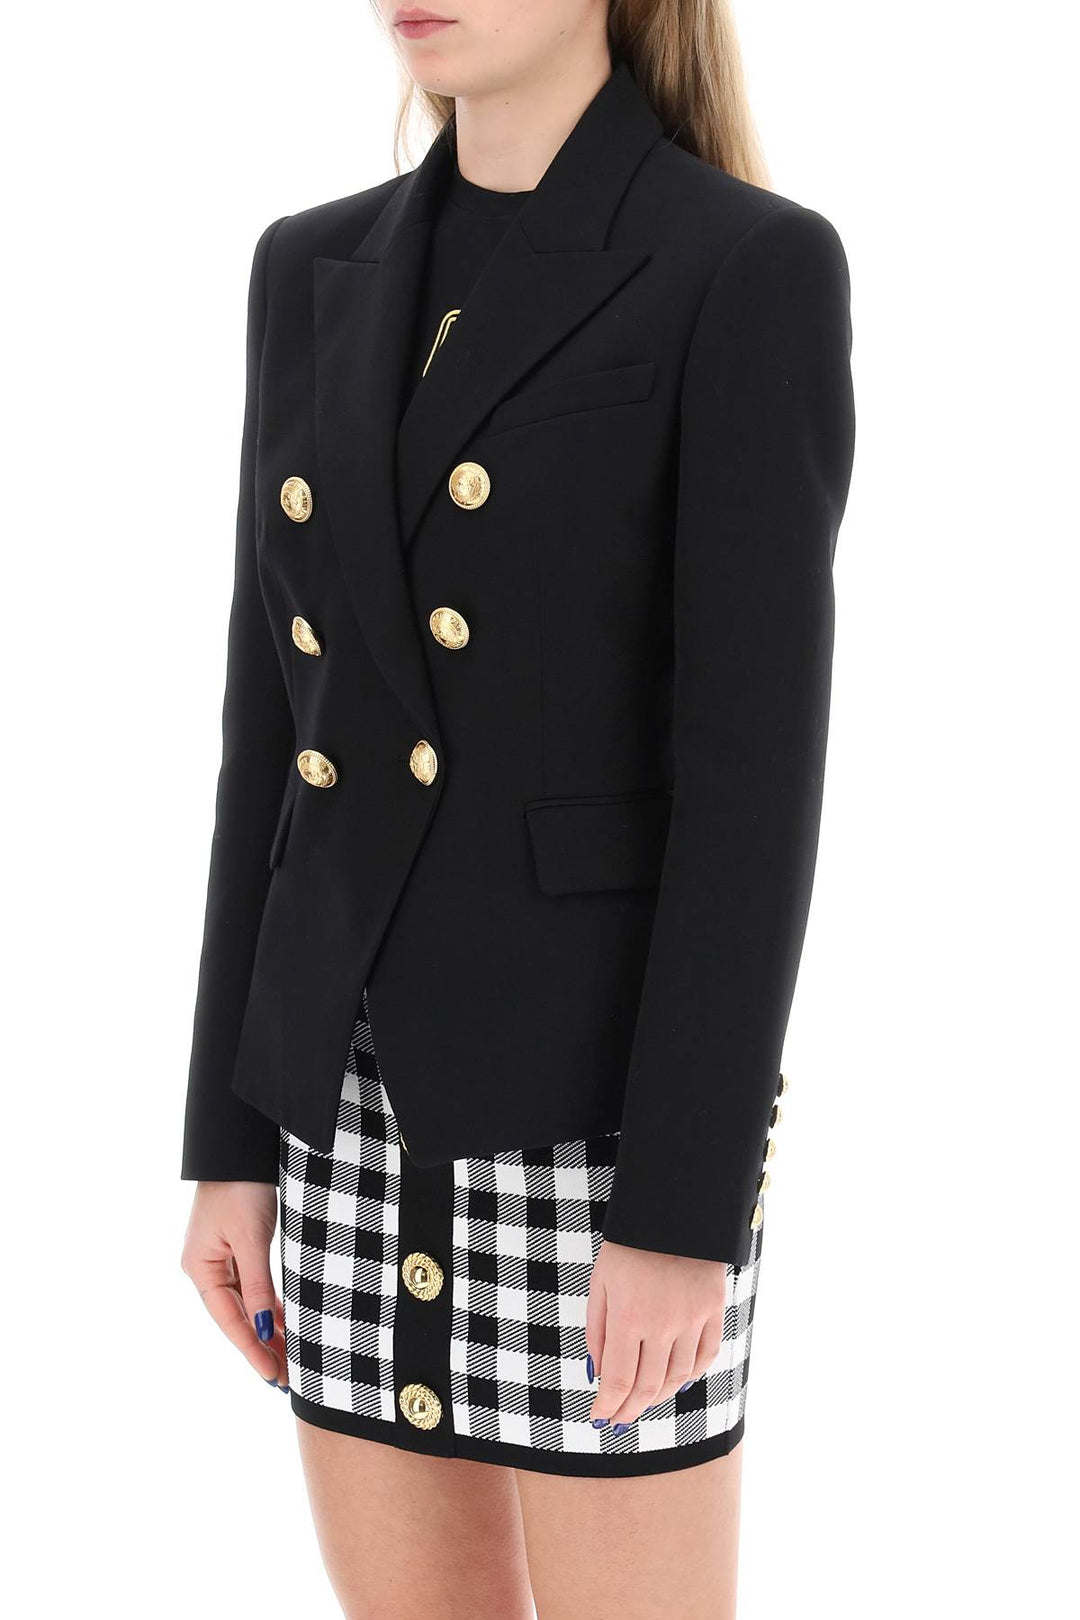 Balmain Fitted Double Breasted Jacket   Nero